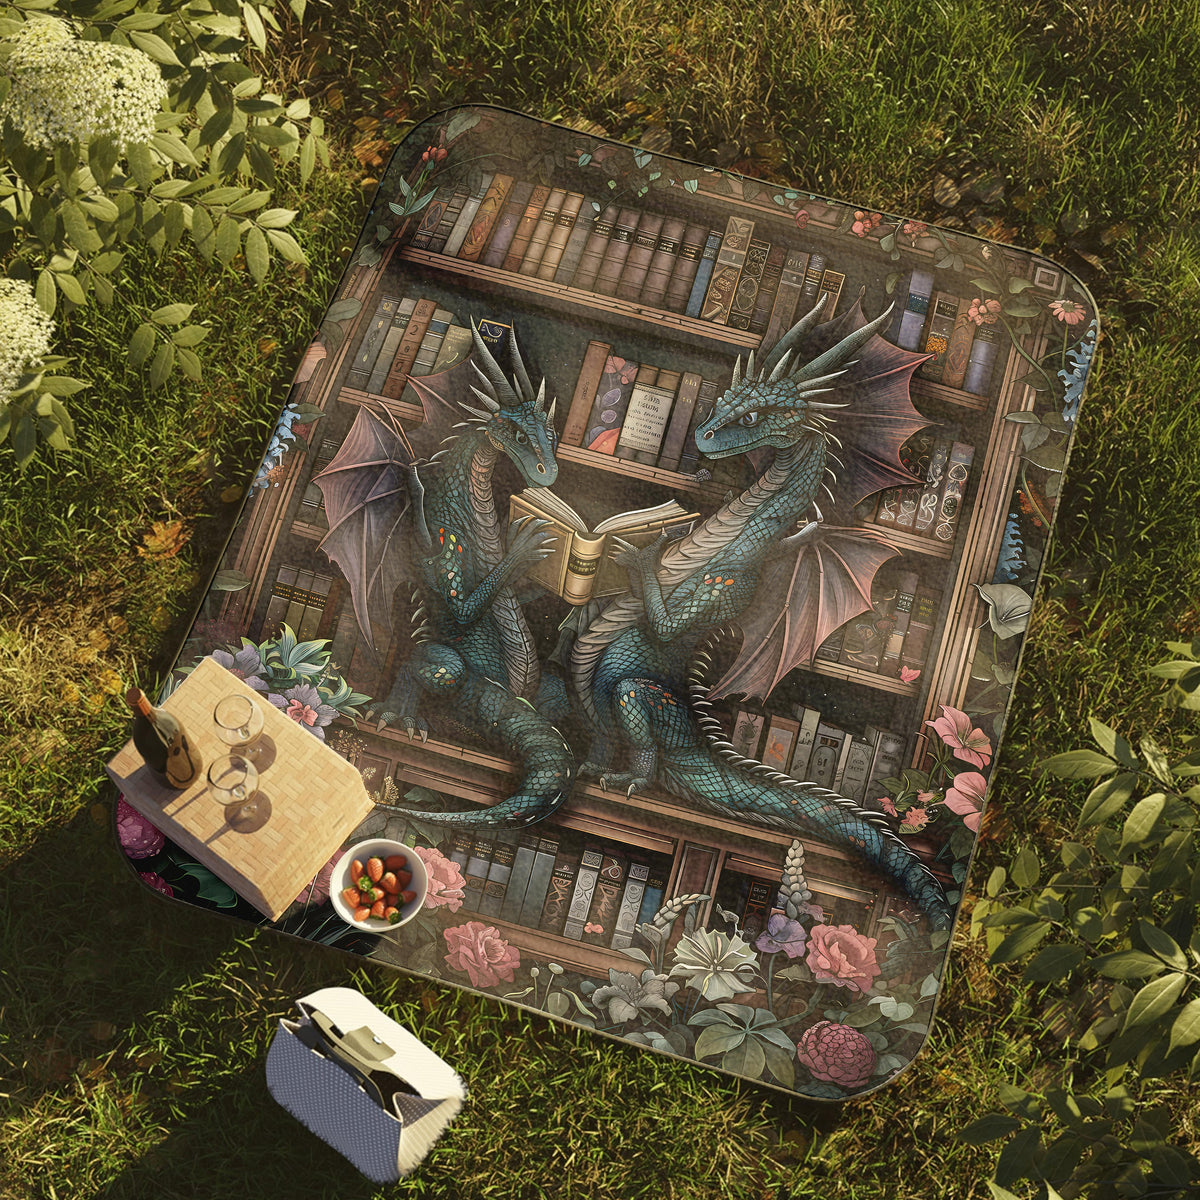 a painting of a dragon sitting on top of a book shelf